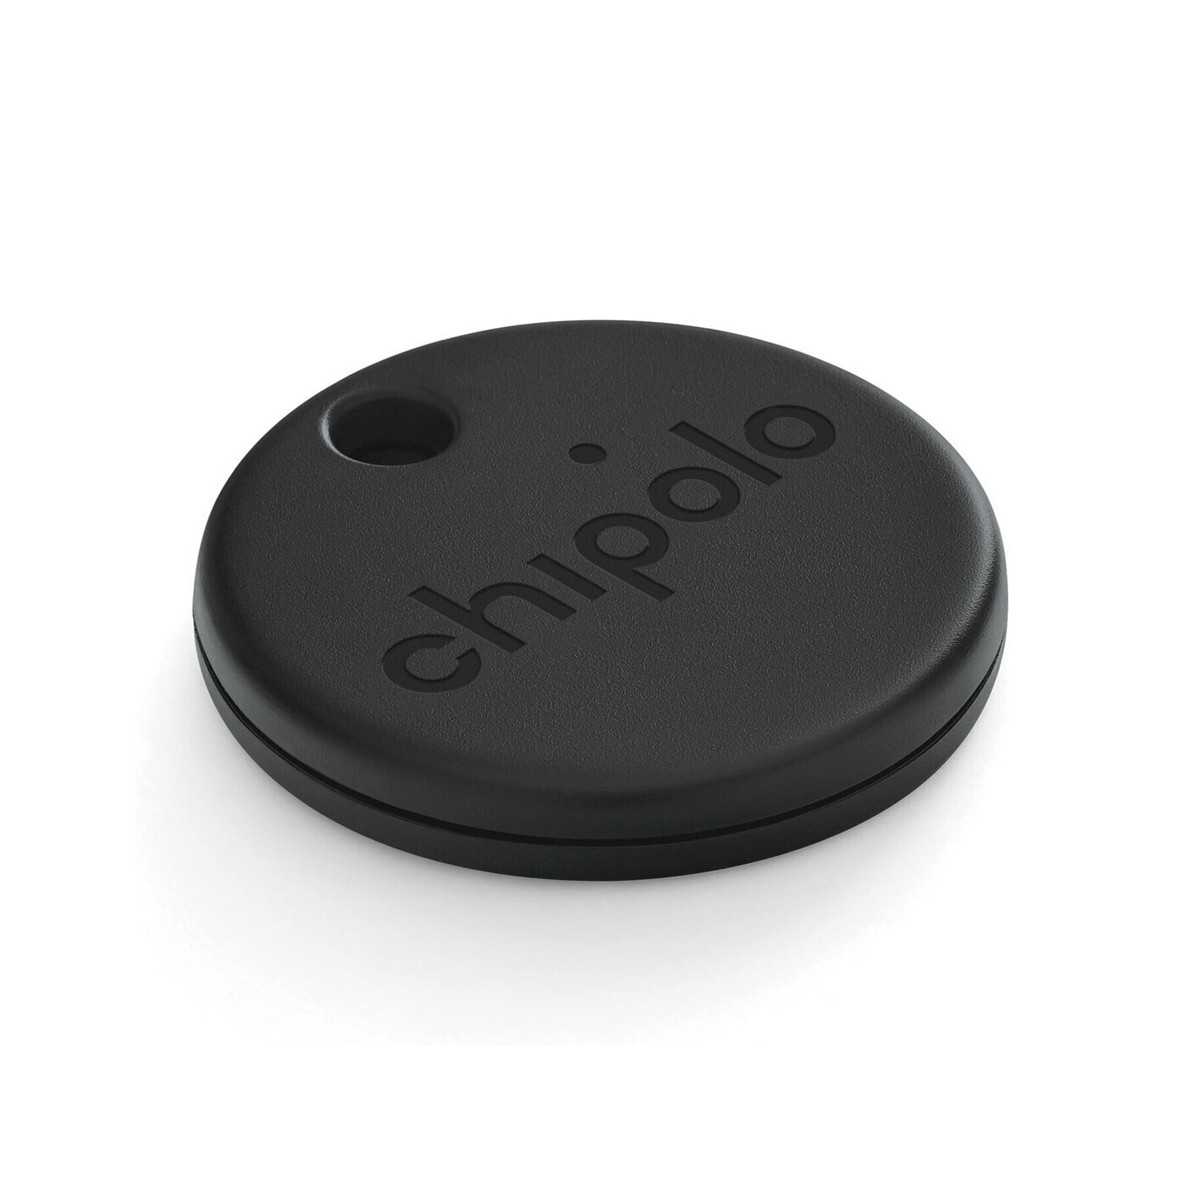 Chipolo ONE Spot Now Available to Pre-Order as Cheaper AirTag